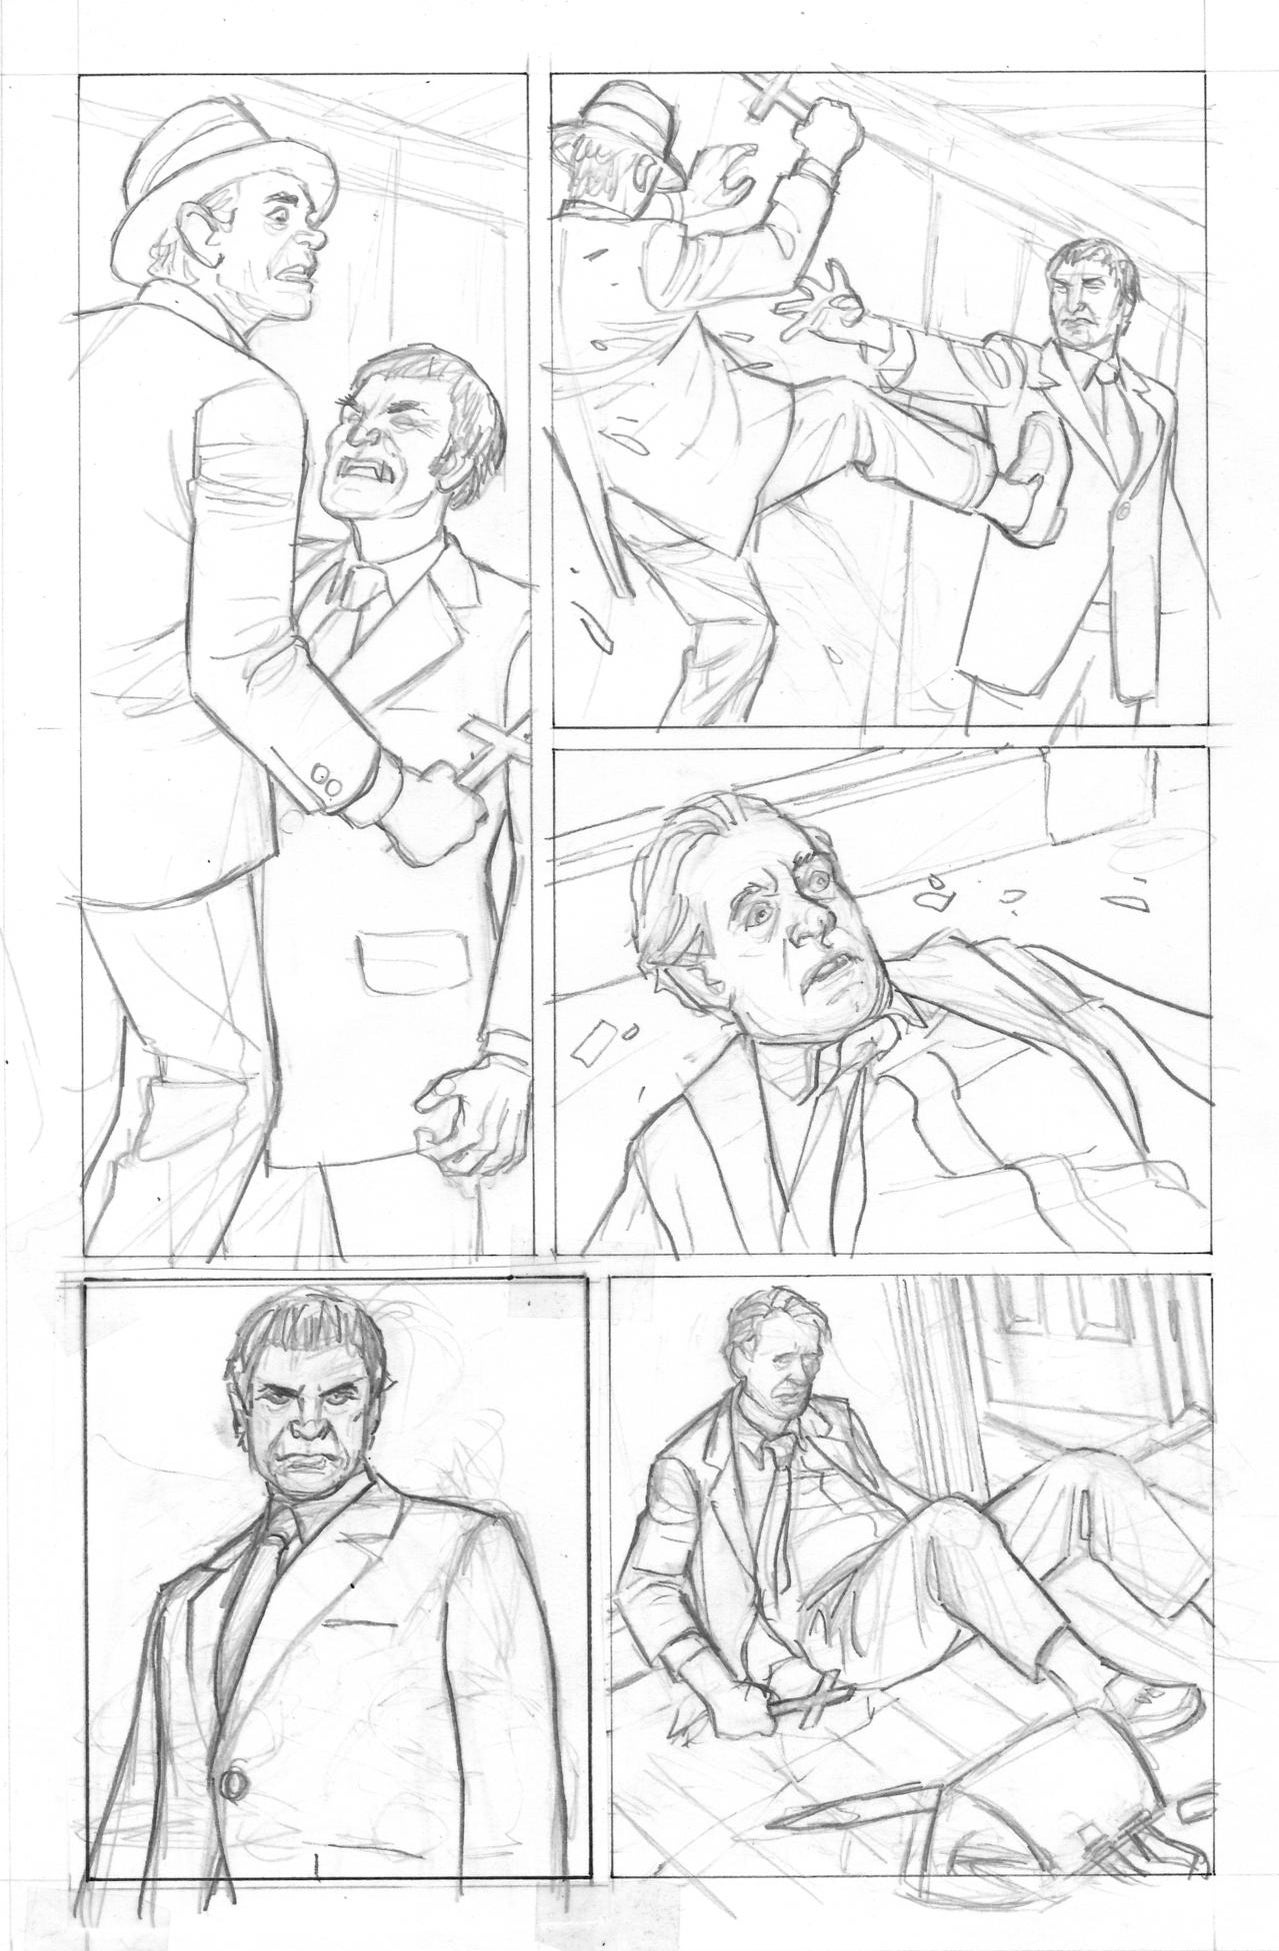 kolchak-interview-with-the-night-stalker-page-4-rough.jpg